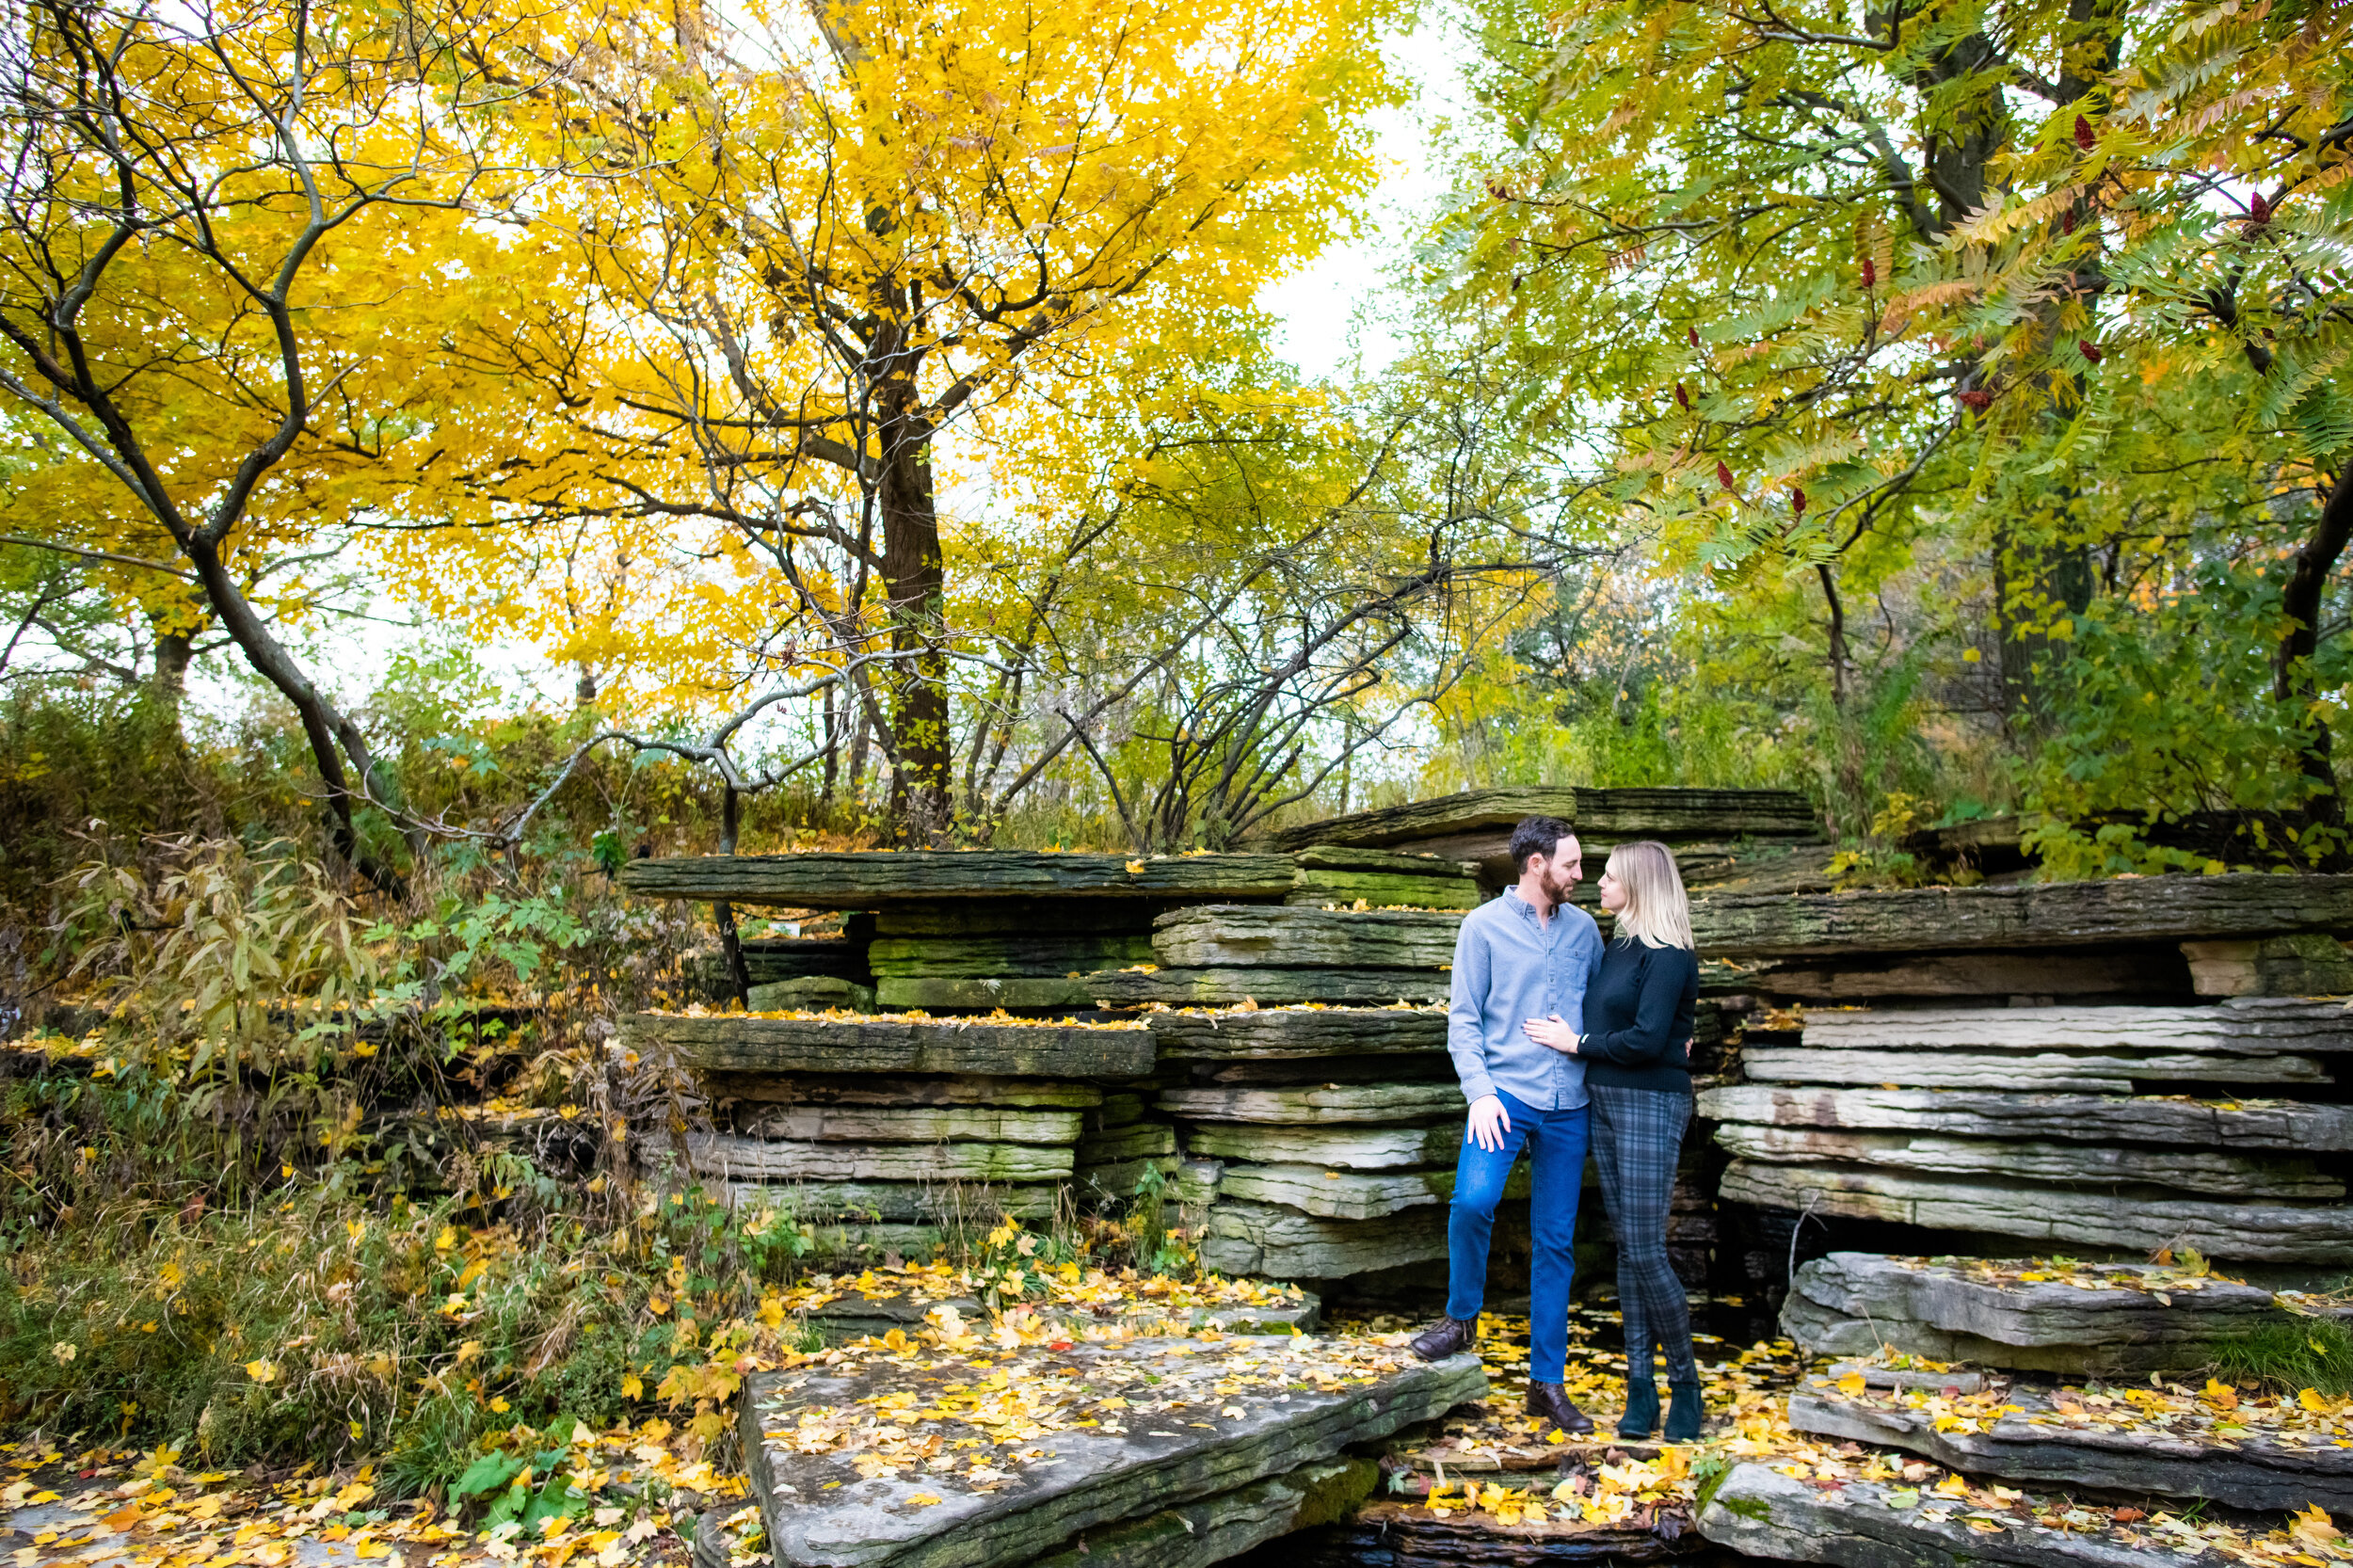 Chicago engagement session with fall colors at the Caldwell Lily Pond: engagement photo captured by J. Brown Photography.